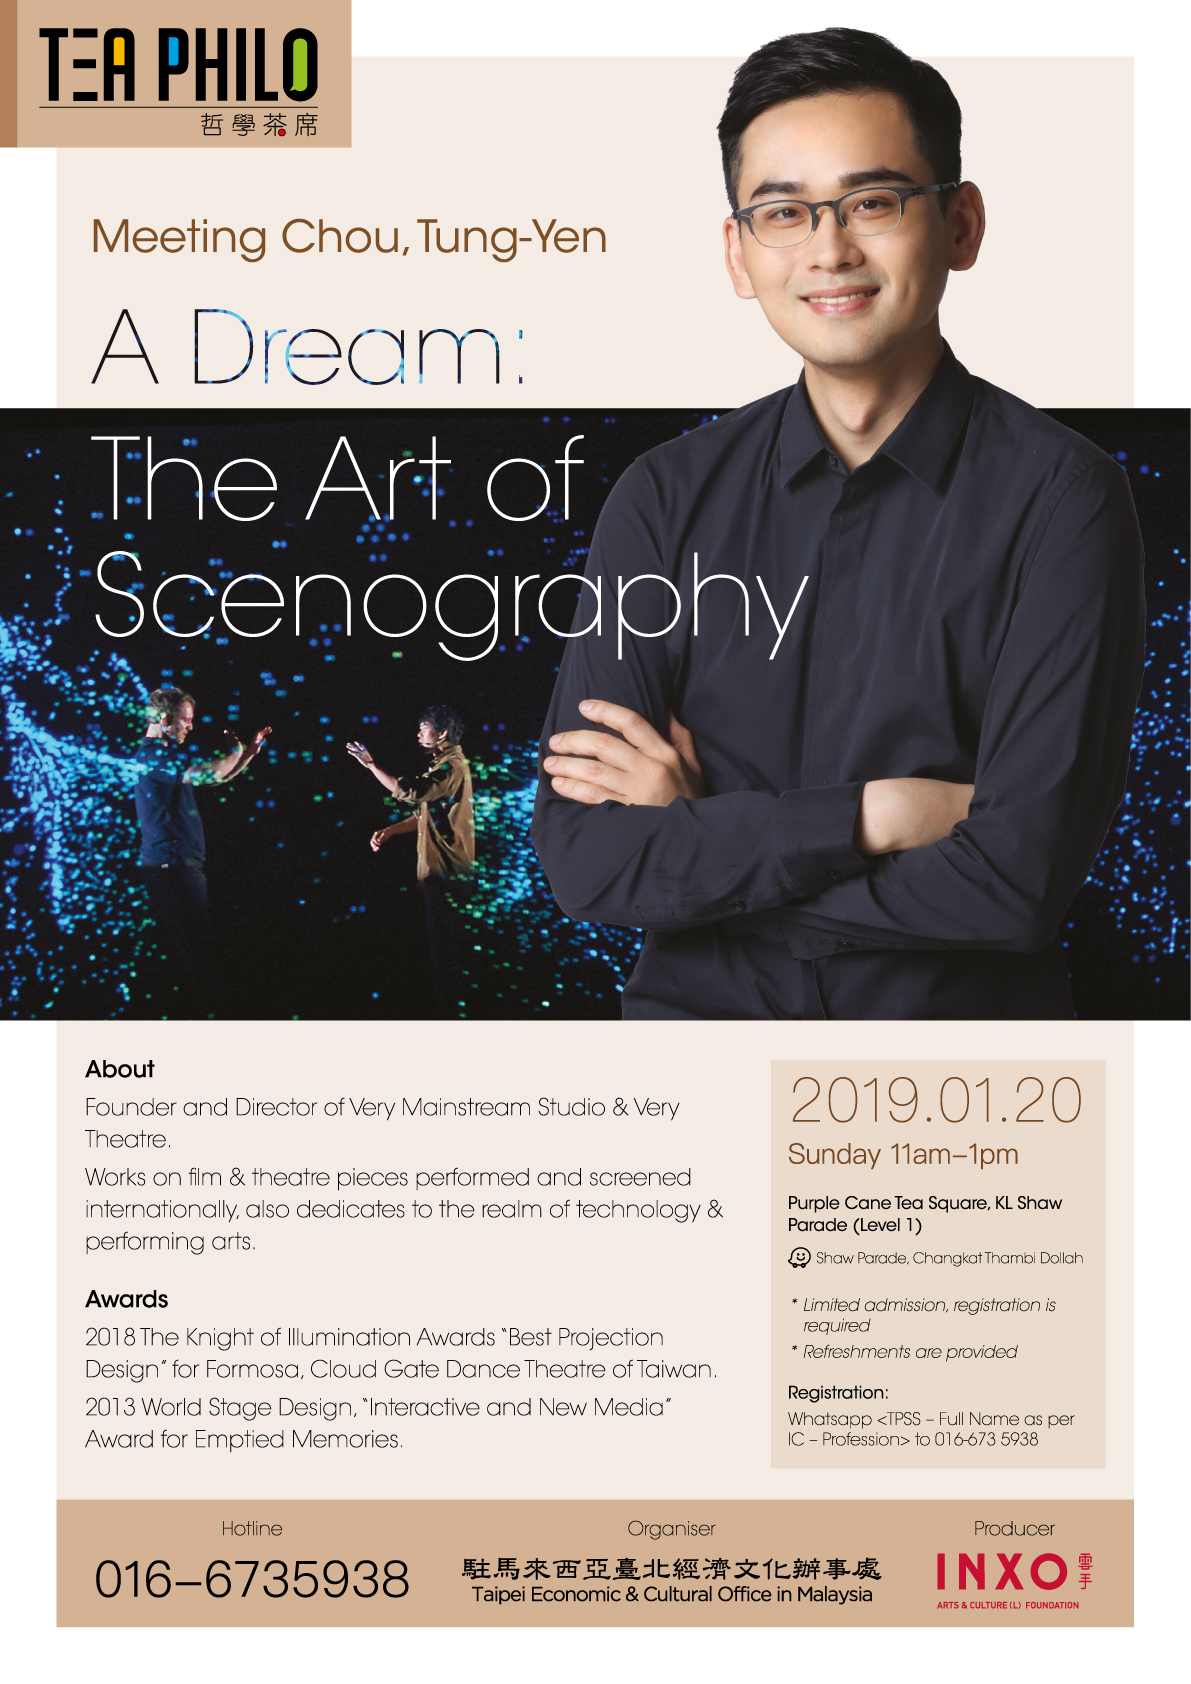 Tea Philo series in Malaysia kicks off with scenography expert